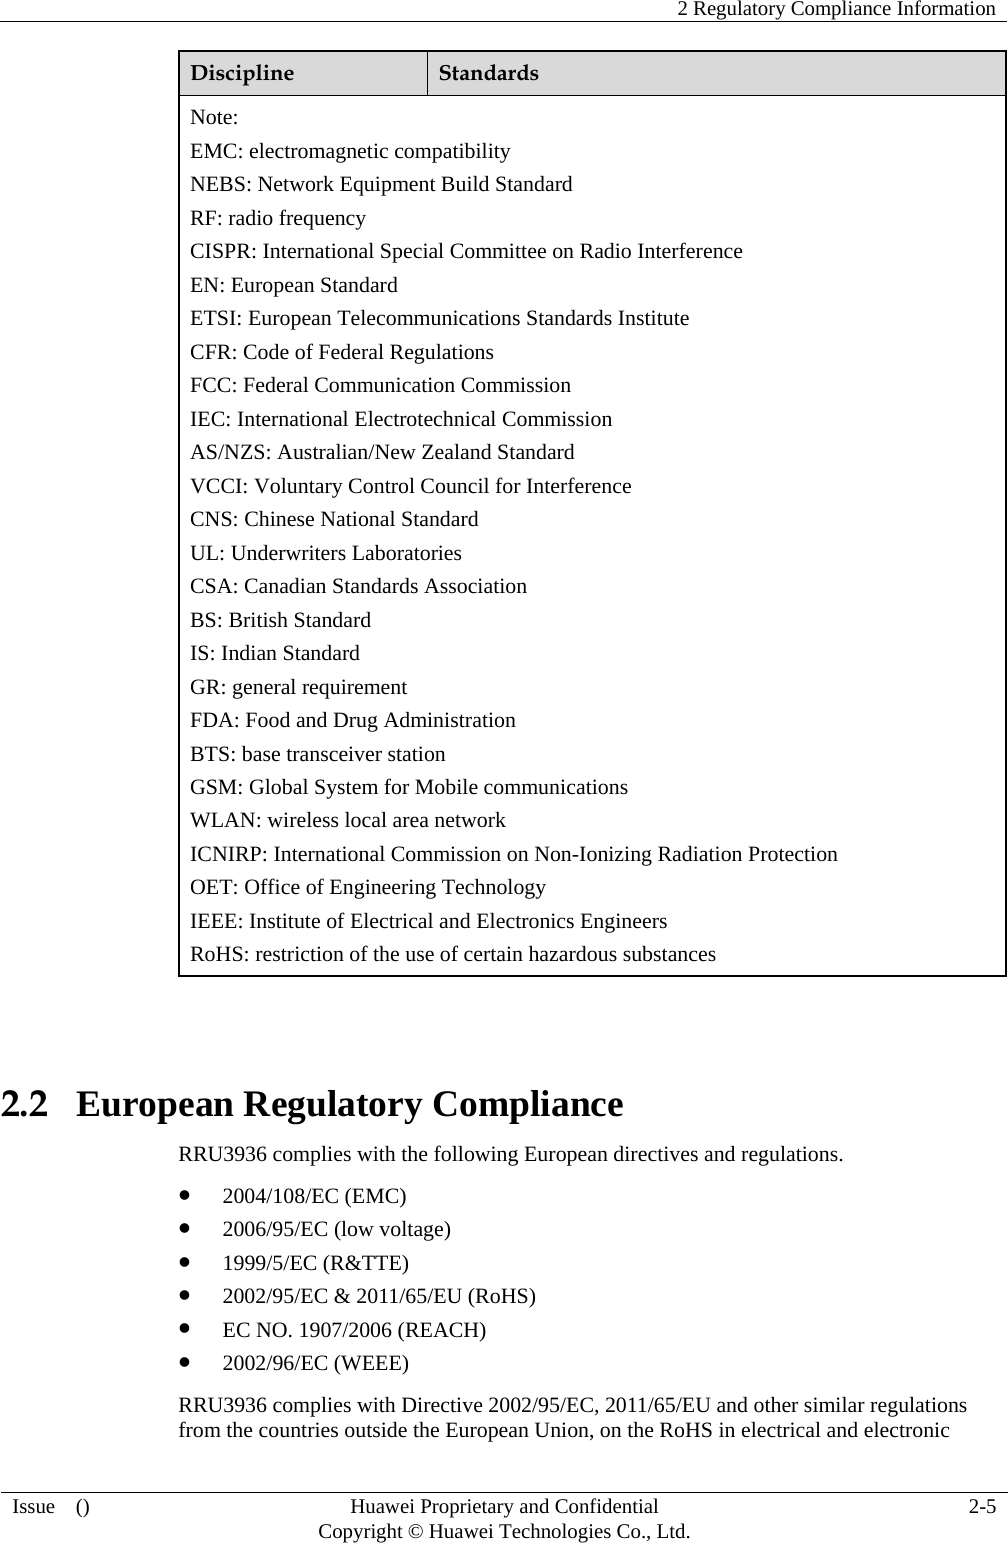    2 Regulatory Compliance Information   Issue  ()  Huawei Proprietary and Confidential     Copyright © Huawei Technologies Co., Ltd.  2-5  Discipline  Standards Note: EMC: electromagnetic compatibility NEBS: Network Equipment Build Standard RF: radio frequency CISPR: International Special Committee on Radio Interference EN: European Standard ETSI: European Telecommunications Standards Institute CFR: Code of Federal Regulations FCC: Federal Communication Commission IEC: International Electrotechnical Commission AS/NZS: Australian/New Zealand Standard VCCI: Voluntary Control Council for Interference CNS: Chinese National Standard UL: Underwriters Laboratories CSA: Canadian Standards Association BS: British Standard IS: Indian Standard GR: general requirement FDA: Food and Drug Administration BTS: base transceiver station GSM: Global System for Mobile communications WLAN: wireless local area network ICNIRP: International Commission on Non-Ionizing Radiation Protection OET: Office of Engineering Technology IEEE: Institute of Electrical and Electronics Engineers RoHS: restriction of the use of certain hazardous substances  2.2   European Regulatory Compliance RRU3936 complies with the following European directives and regulations.  2004/108/EC (EMC)  2006/95/EC (low voltage)  1999/5/EC (R&amp;TTE)  2002/95/EC &amp; 2011/65/EU (RoHS)  EC NO. 1907/2006 (REACH)  2002/96/EC (WEEE) RRU3936 complies with Directive 2002/95/EC, 2011/65/EU and other similar regulations from the countries outside the European Union, on the RoHS in electrical and electronic 